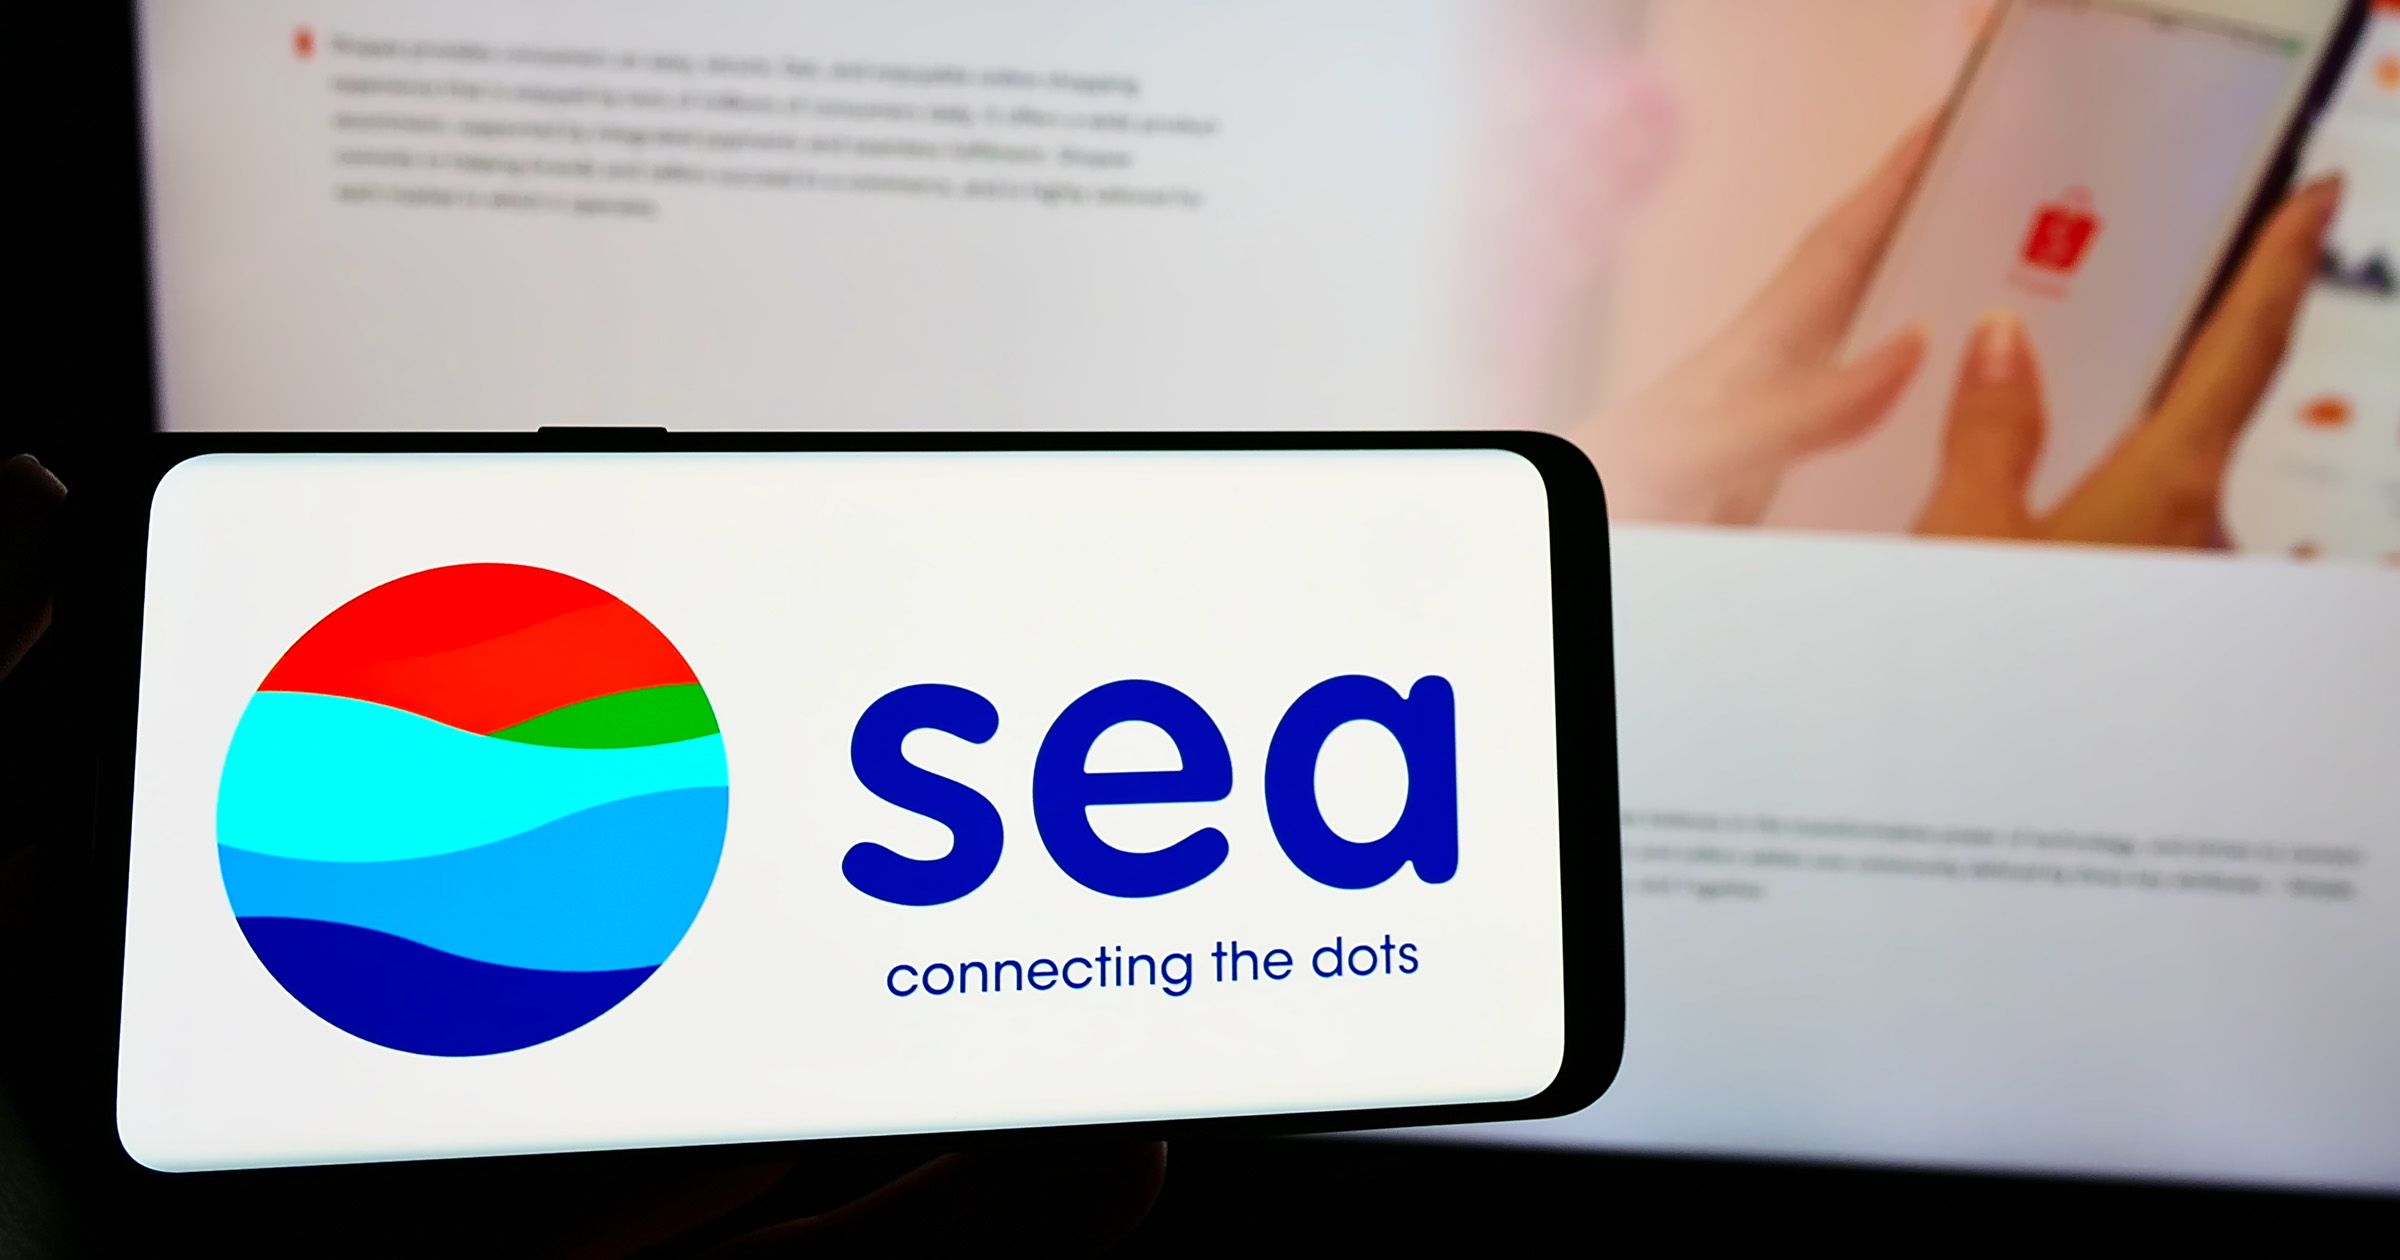 Sea Ltd. doubles its valuation to US$40 billion in 4 months